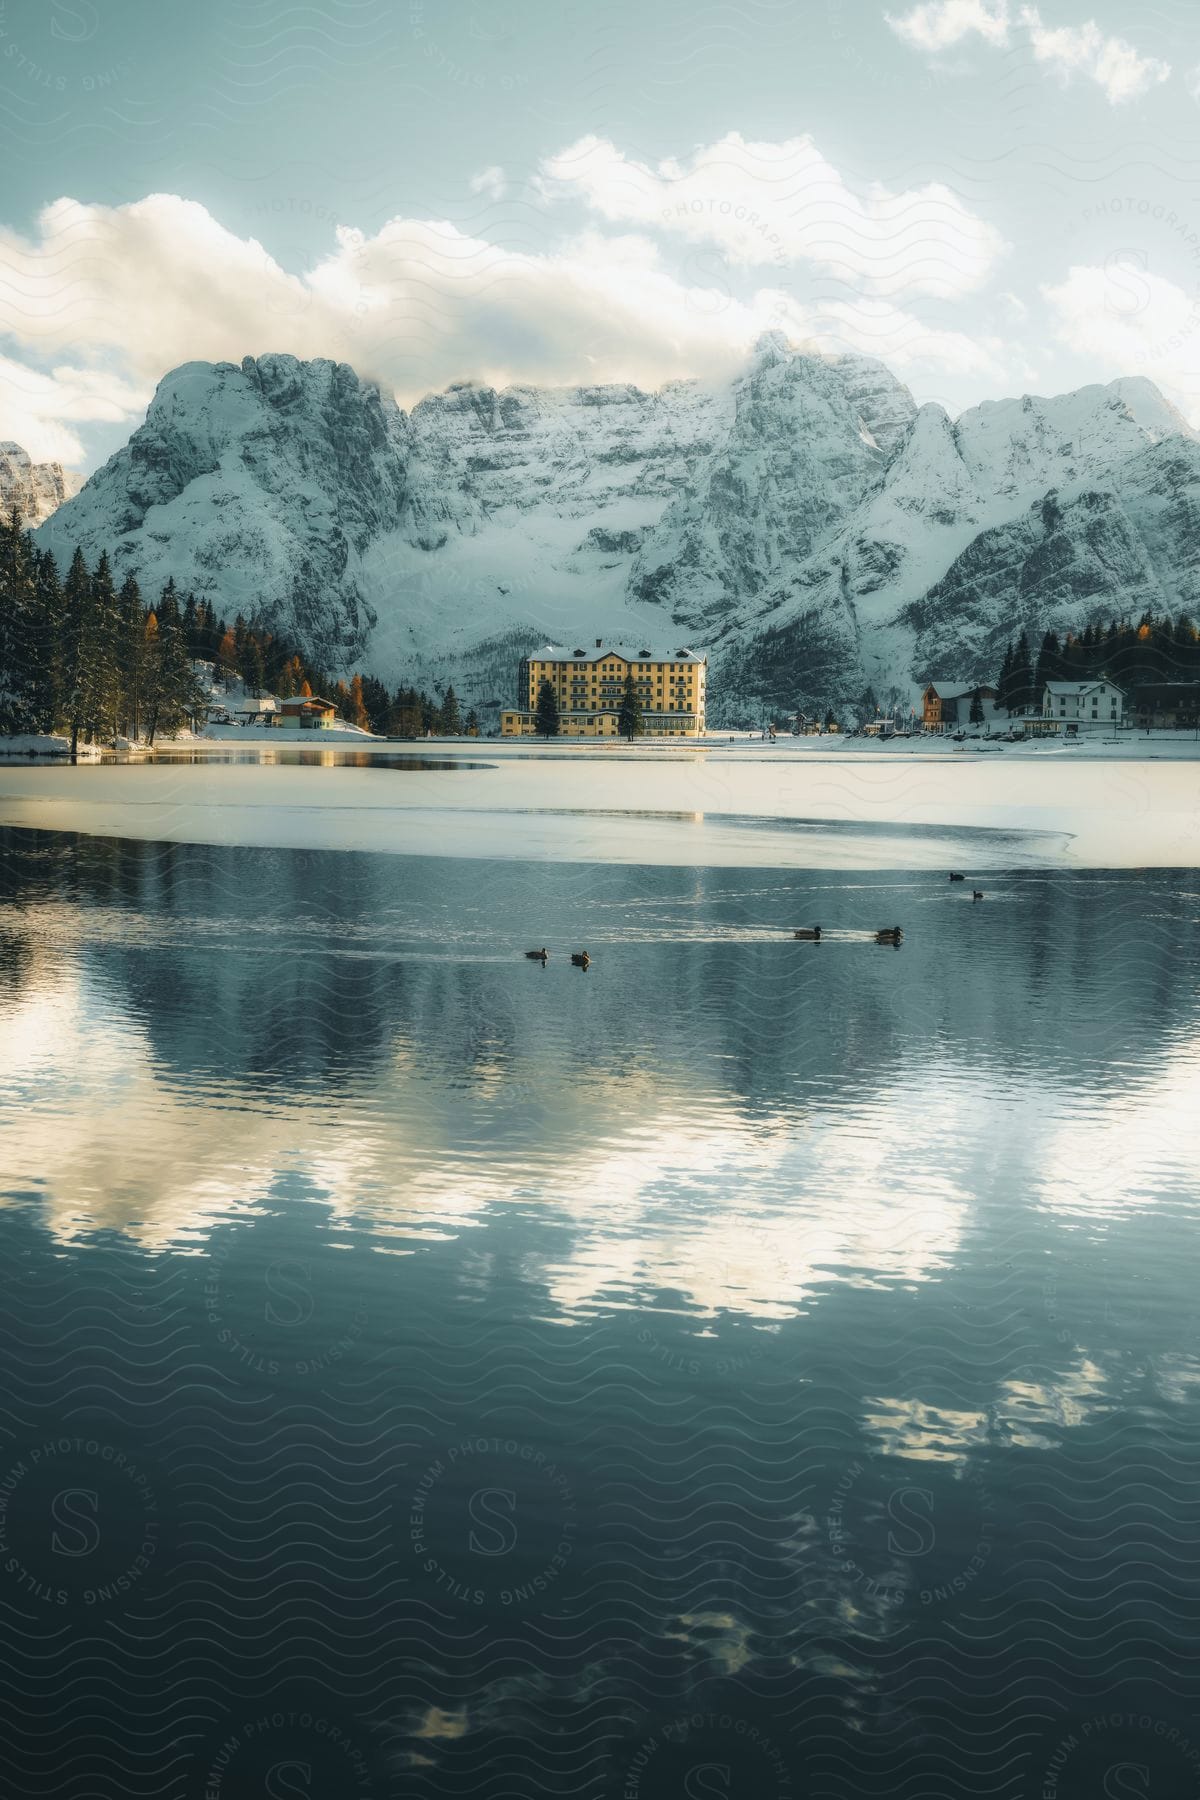 Landscape of Lake Misurina with hotel and houses and snow-covered mountains in the background